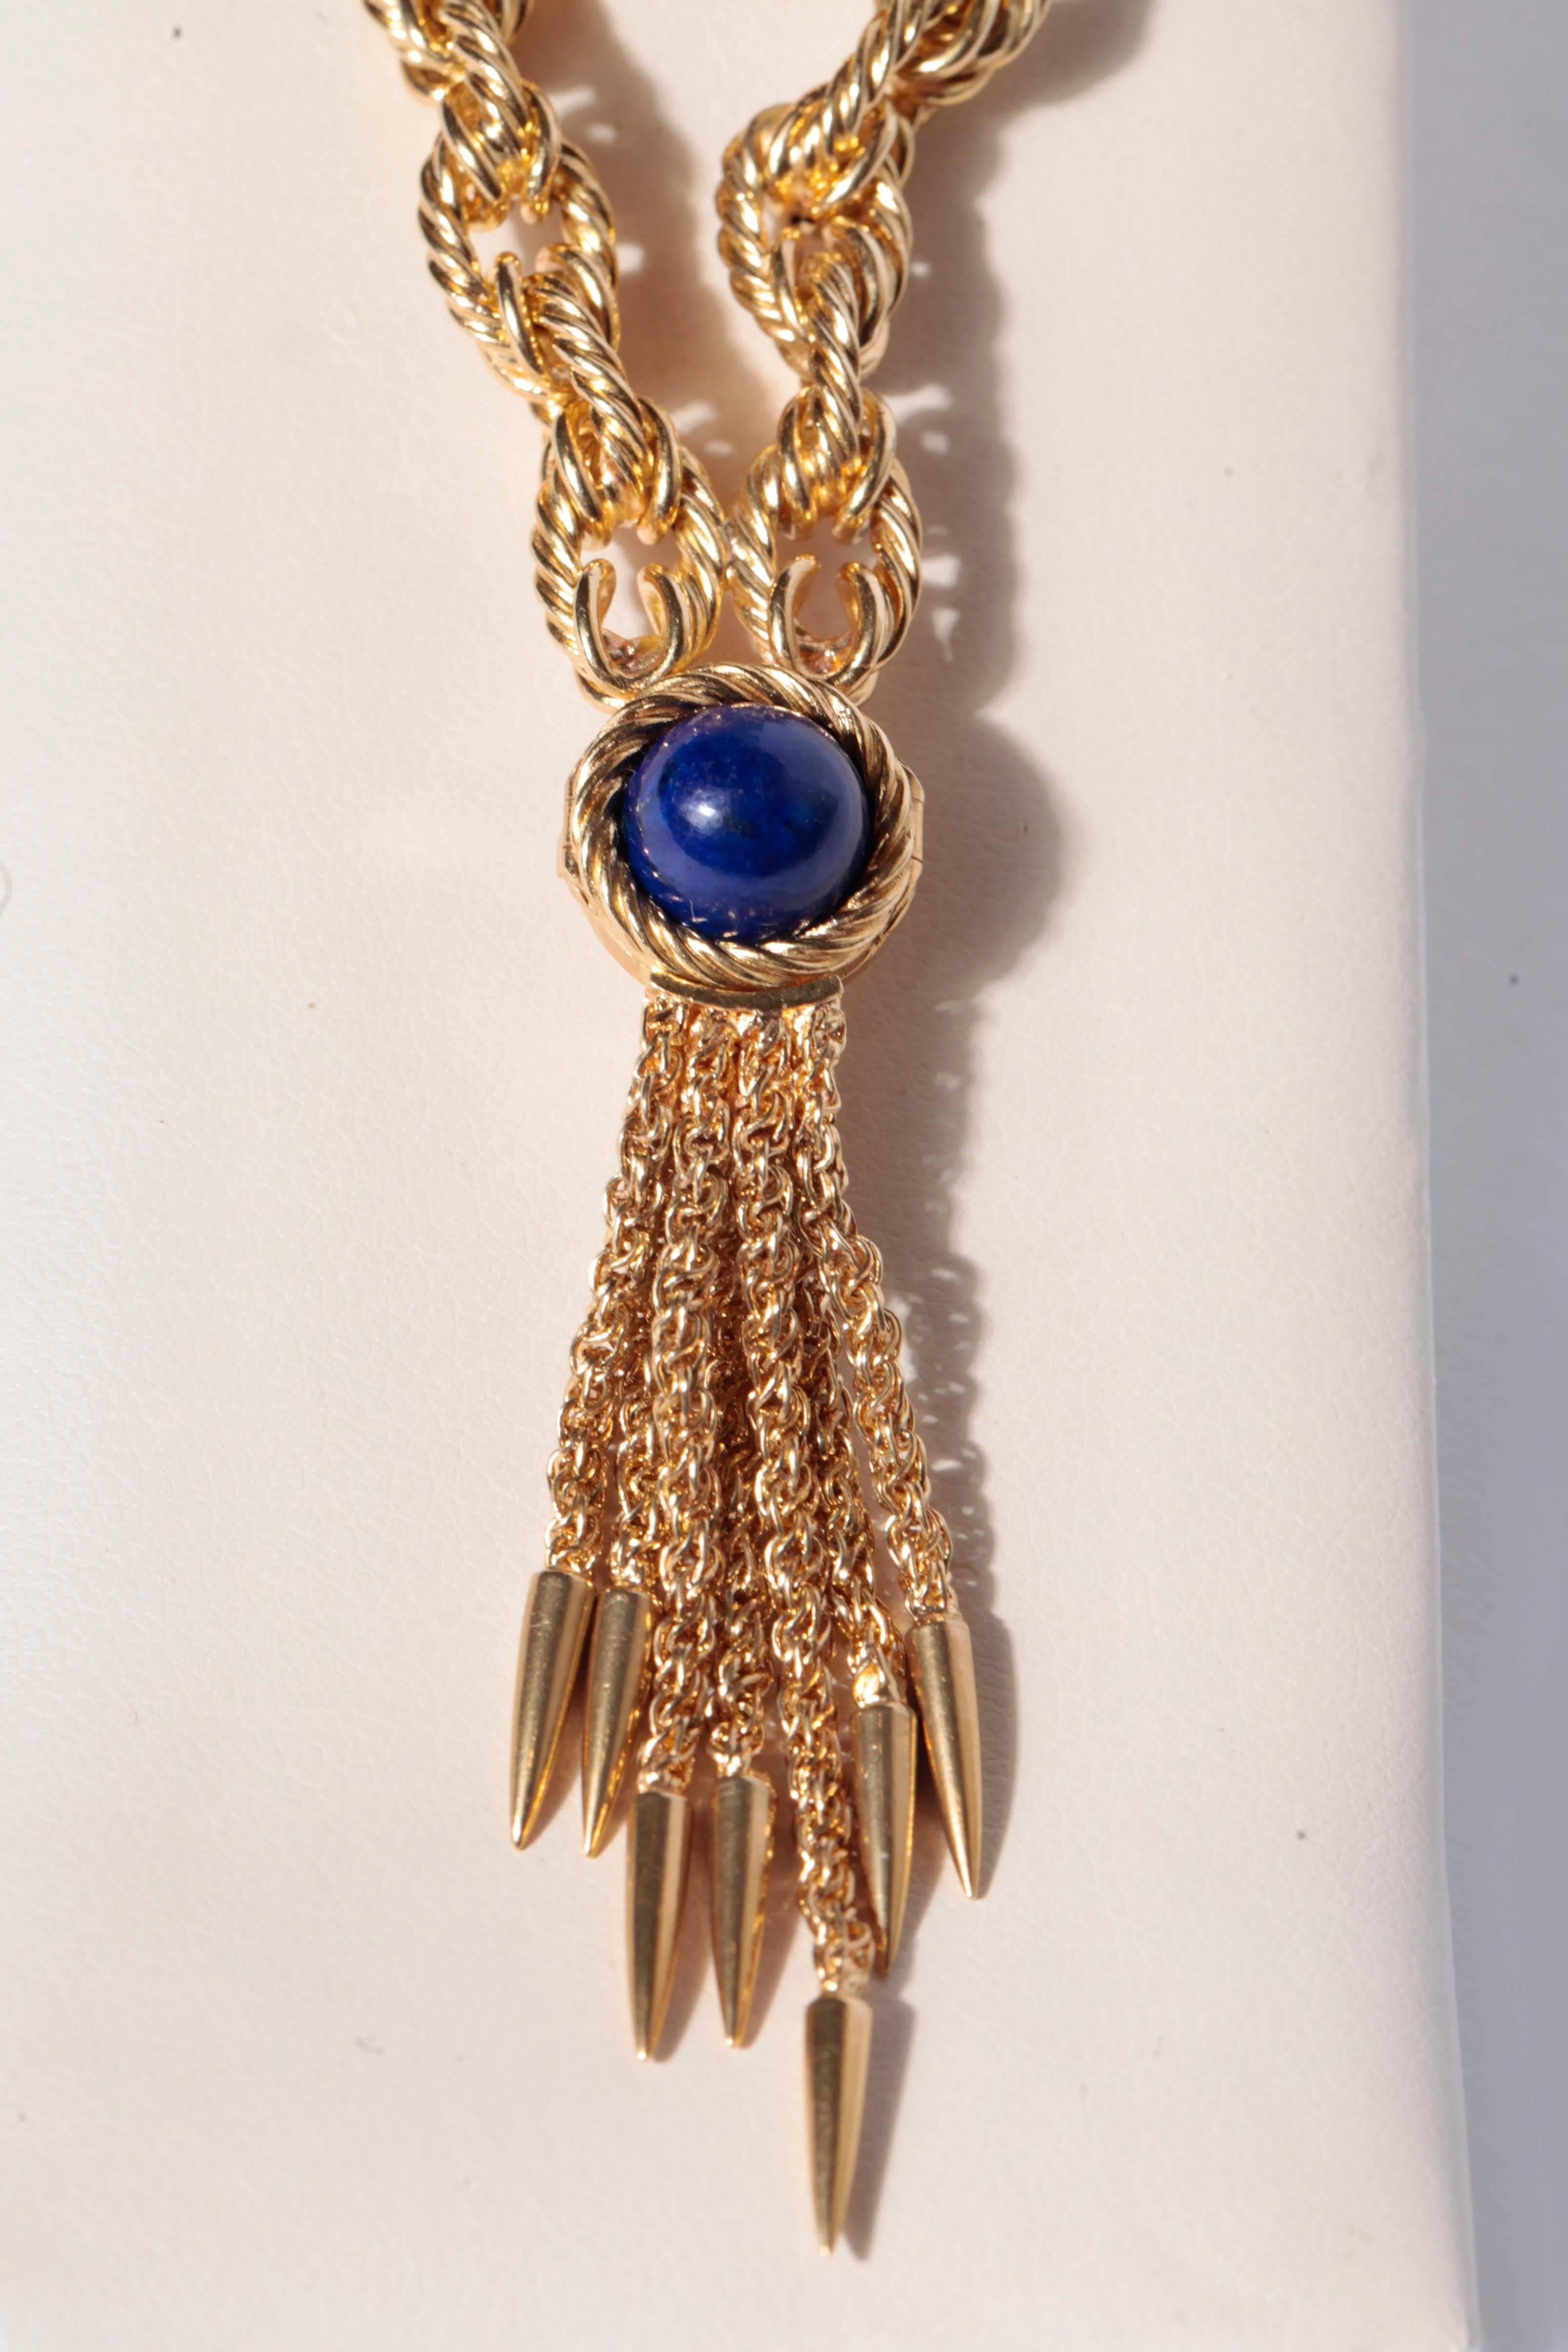 Piaget Ladies Yellow Gold Lapis Lazuli Necklace Bracelet Manual Wind Wristwatch In Good Condition For Sale In Nashville, TN